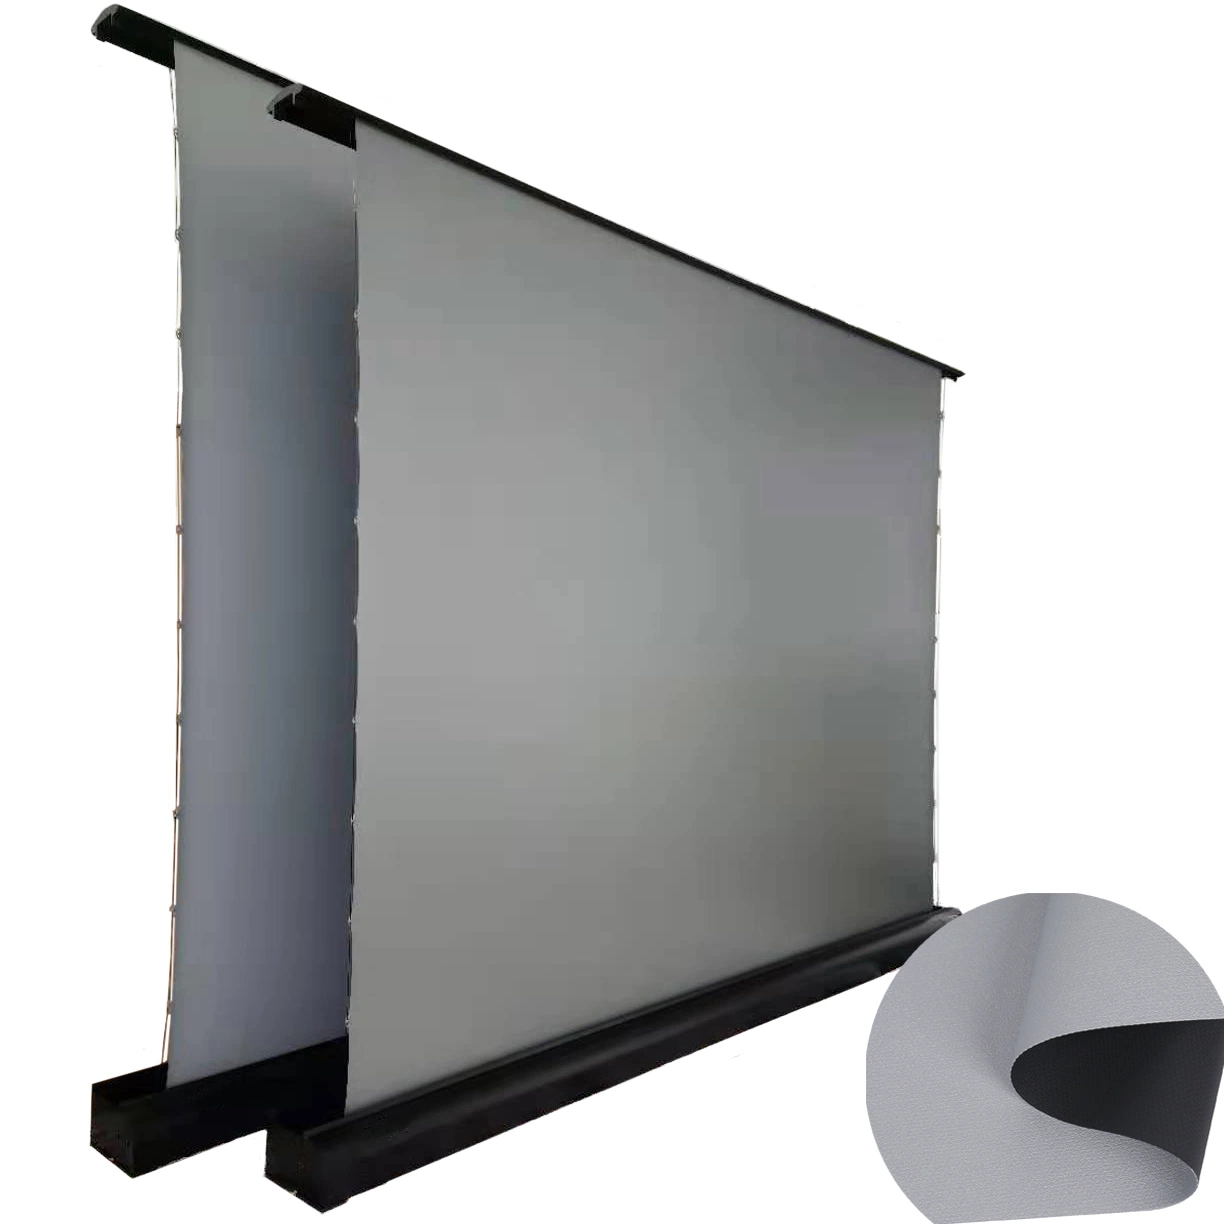 Super Flat Silver Projection Fabric Projection Screen Fabric for Tripod Экран